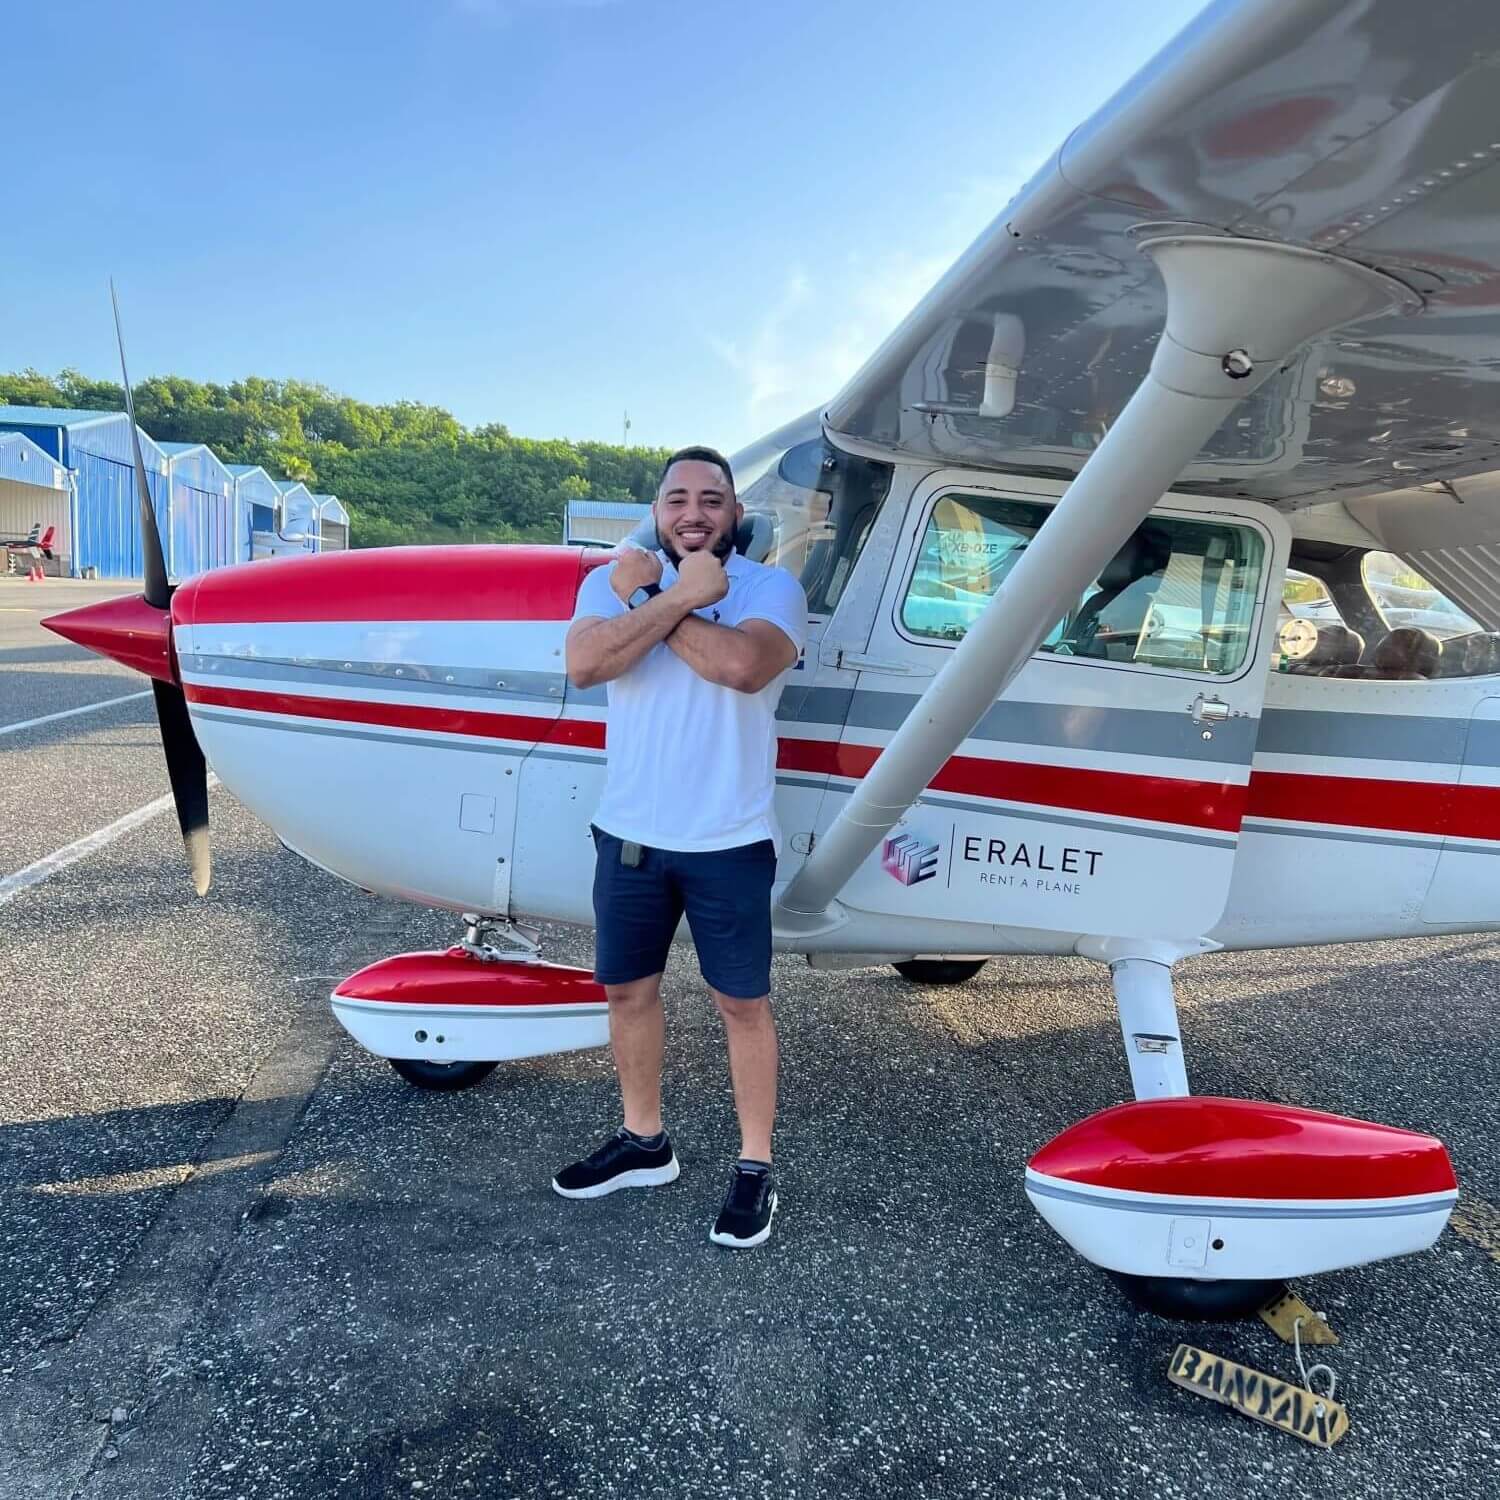 Byron crossing his arms in front of a small airplane